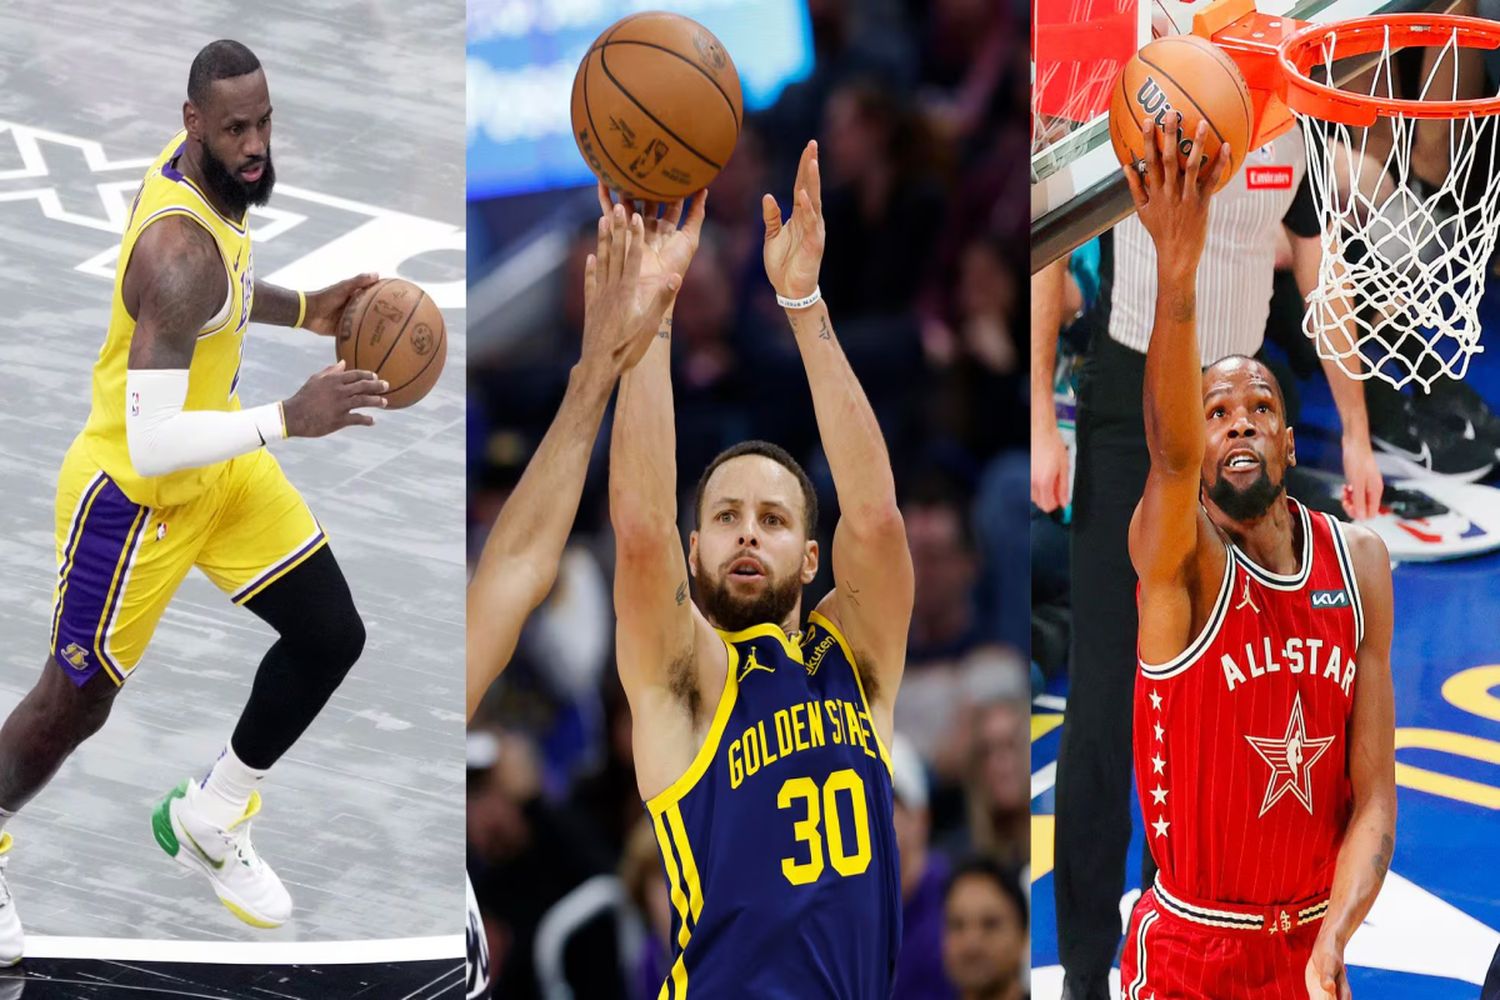 LeBron James, Stephen Curry and Kevin Durant: The triumvirate of basketball excellence, selected to lead Team USA at the Paris 2024 Olympics.